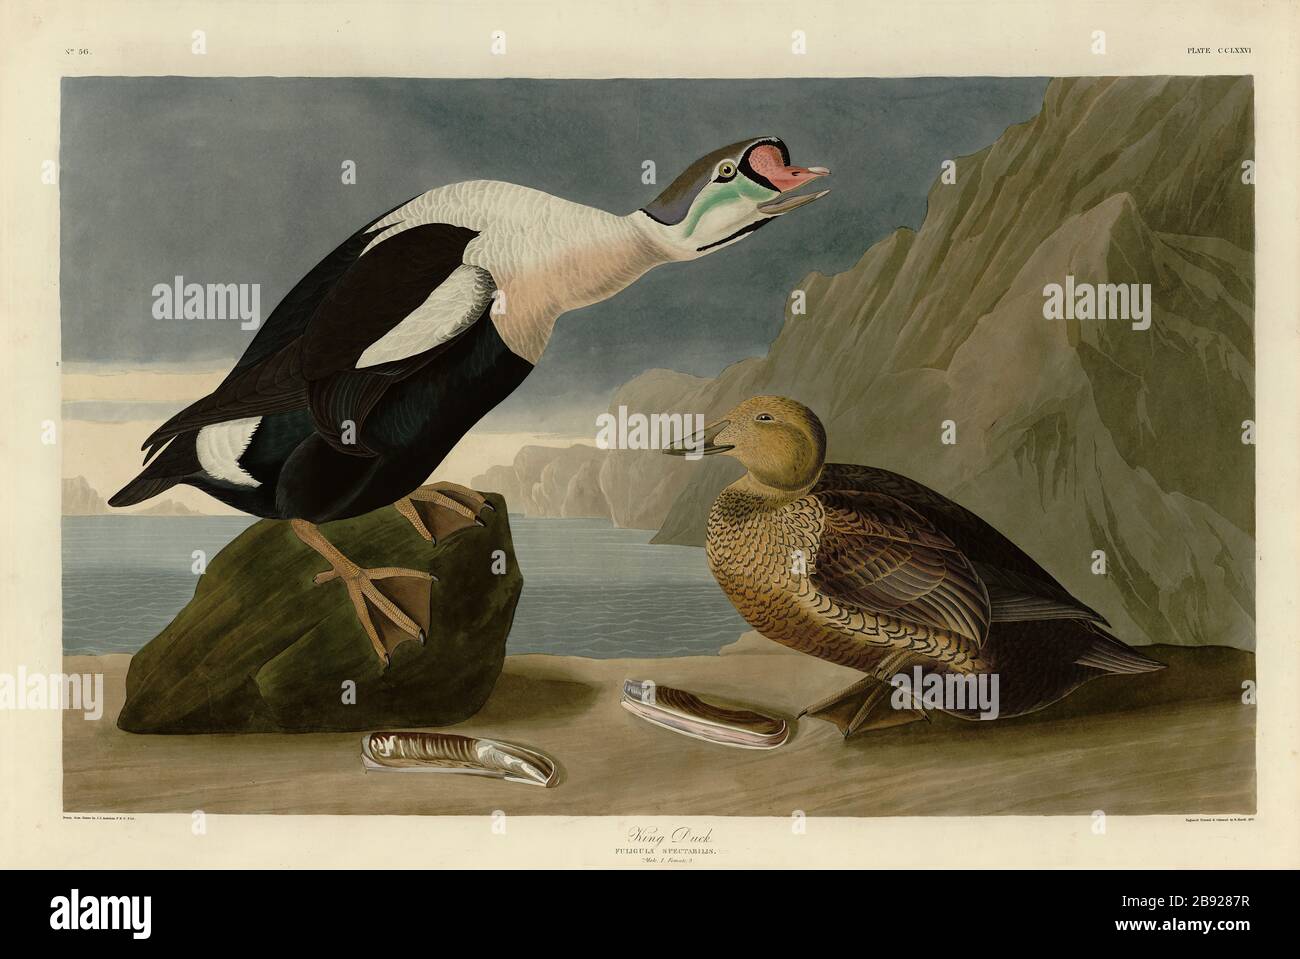 Plate 276 King Duck (King Eider) from The Birds of America folio (1827–1839) by John James Audubon - Very high resolution and quality edited image Stock Photo